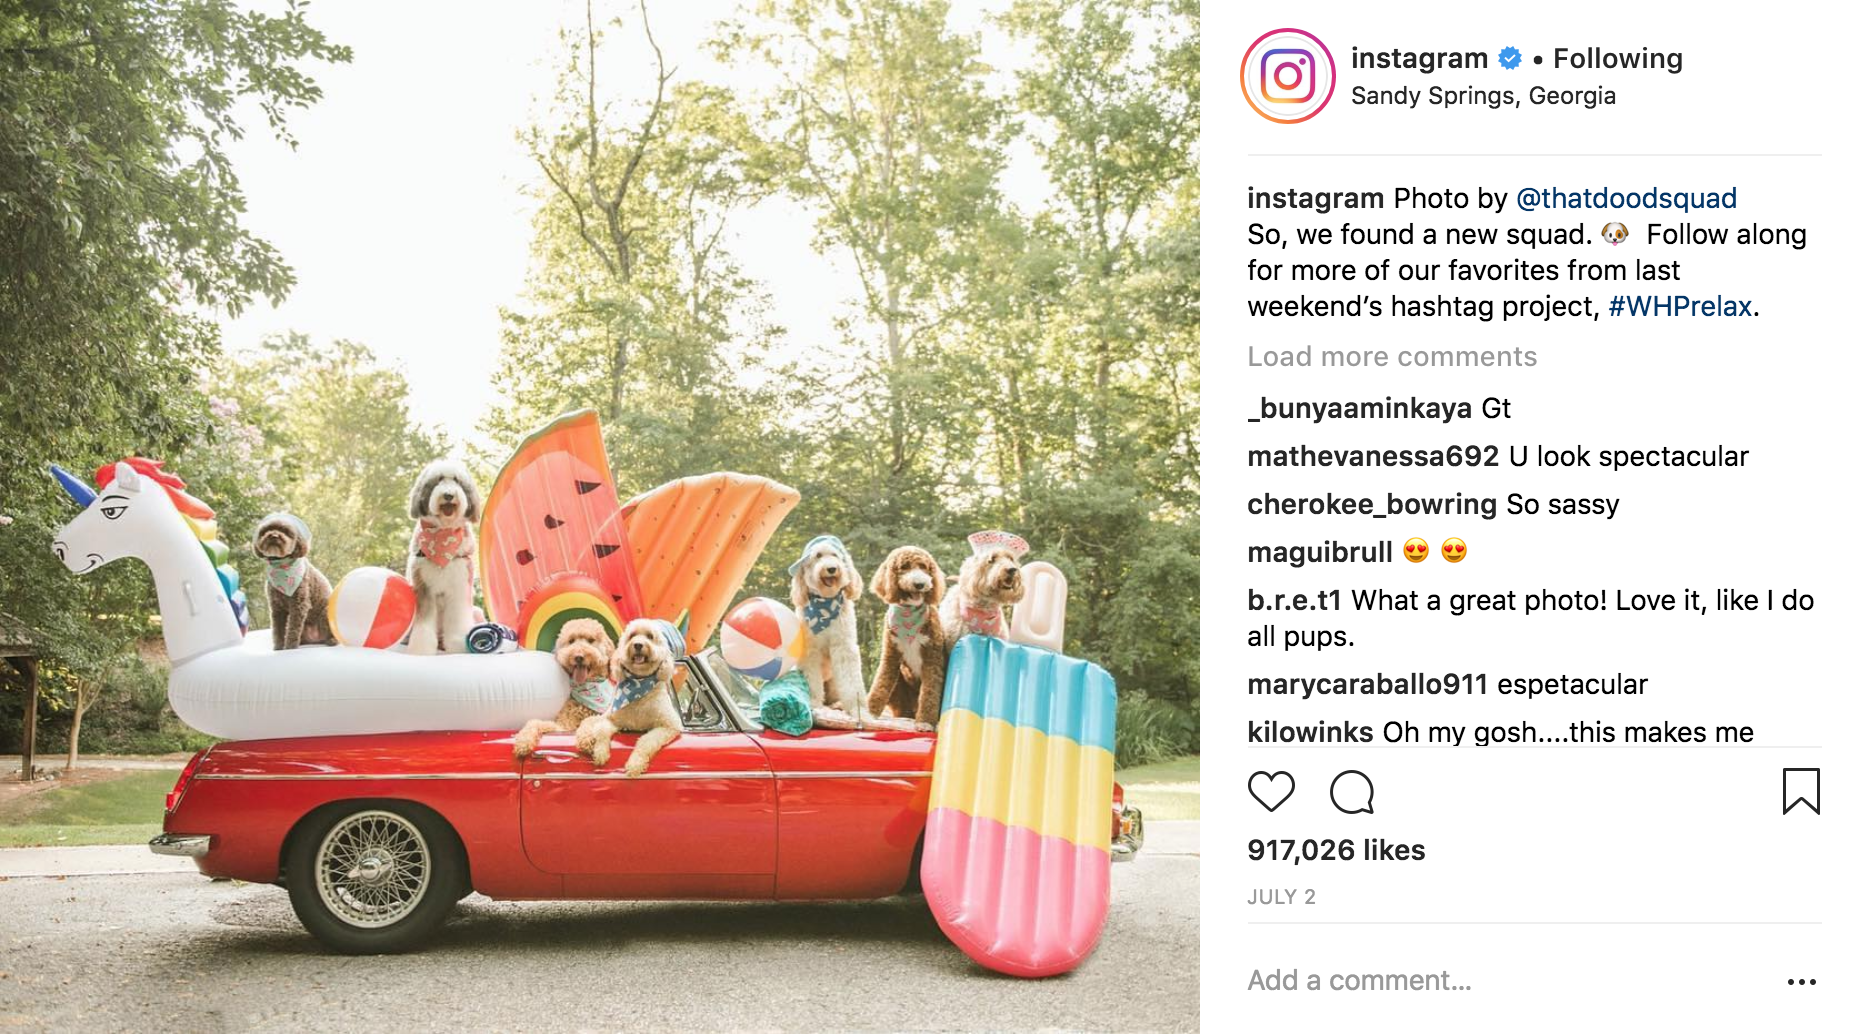 Screen-Shot-2018-08-13-at-5.41.45-PM 6 Creative Ways to Get More Instagram Followers in 2018